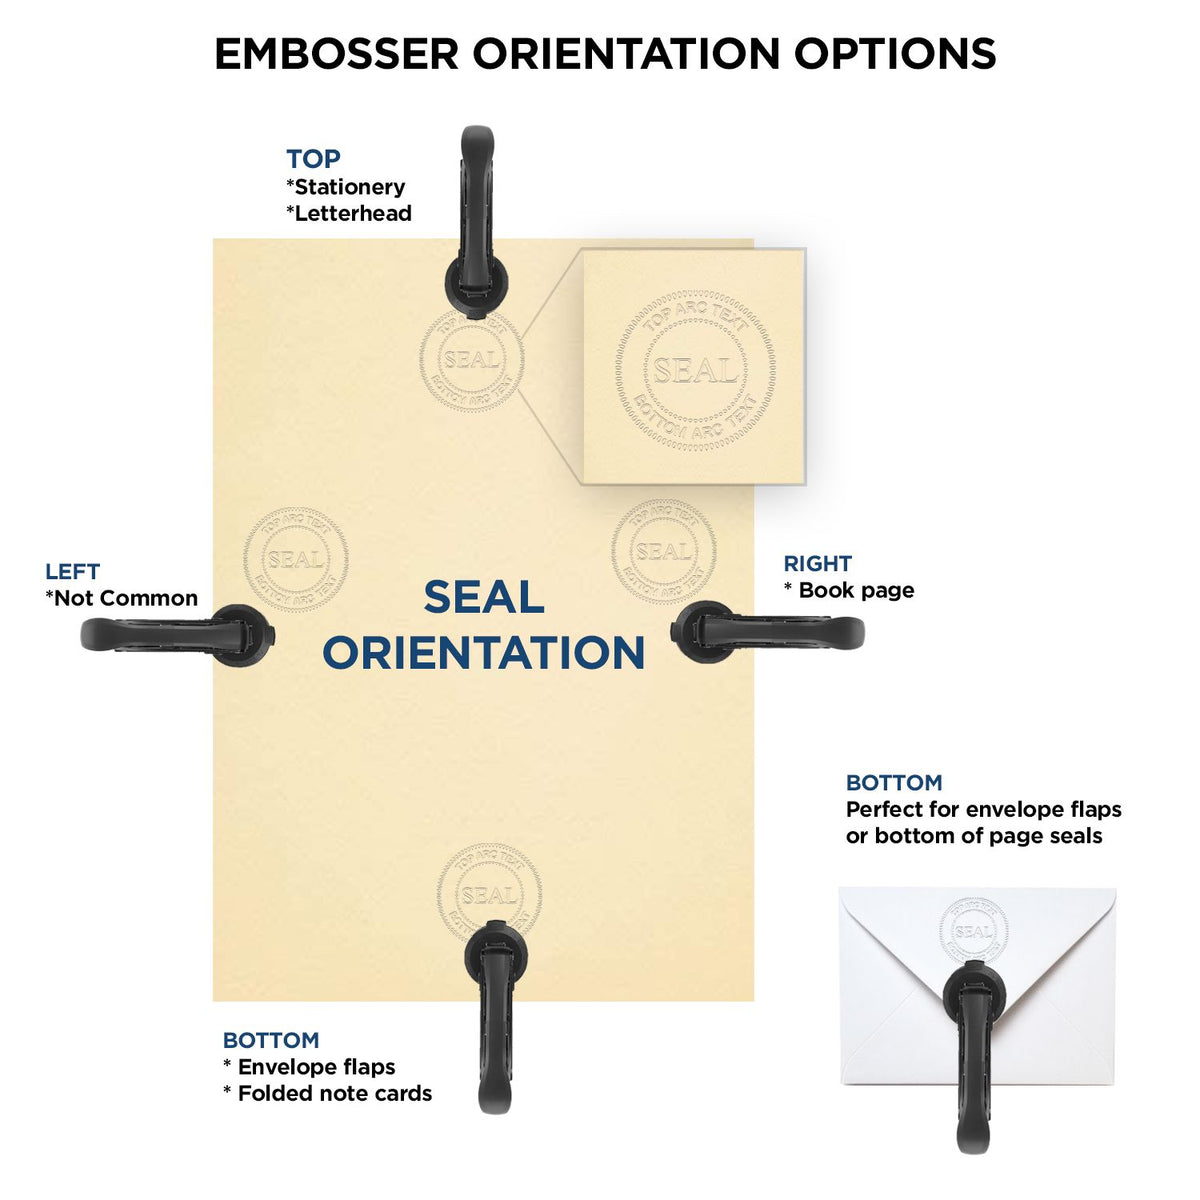 An infographic for the Handheld Arizona Land Surveyor Seal showing embosser orientation, this is showing examples of a top, bottom, right and left insert.